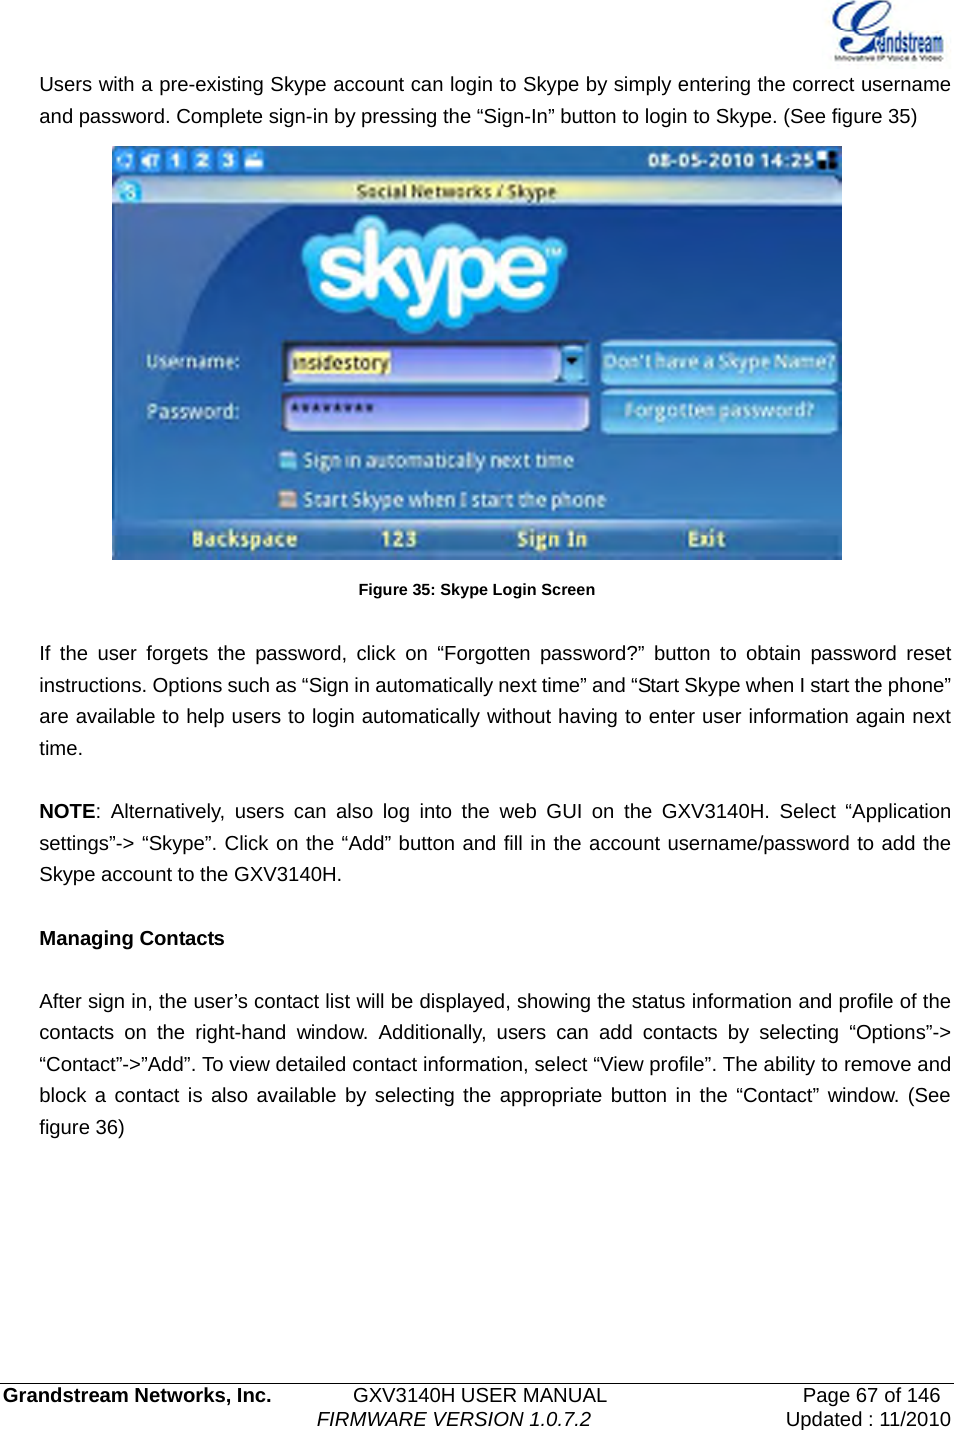   Grandstream Networks, Inc.        GXV3140H USER MANUAL                  Page 67 of 146                                FIRMWARE VERSION 1.0.7.2 Updated : 11/2010  Users with a pre-existing Skype account can login to Skype by simply entering the correct username and password. Complete sign-in by pressing the “Sign-In” button to login to Skype. (See figure 35)  Figure 35: Skype Login Screen  If the user forgets the password, click on “Forgotten password?” button to obtain password reset instructions. Options such as “Sign in automatically next time” and “Start Skype when I start the phone” are available to help users to login automatically without having to enter user information again next time.   NOTE: Alternatively, users can also log into the web GUI on the GXV3140H. Select “Application settings”-&gt; “Skype”. Click on the “Add” button and fill in the account username/password to add the Skype account to the GXV3140H.    Managing Contacts  After sign in, the user’s contact list will be displayed, showing the status information and profile of the contacts on the right-hand window. Additionally, users can add contacts by selecting “Options”-&gt; “Contact”-&gt;”Add”. To view detailed contact information, select “View profile”. The ability to remove and block a contact is also available by selecting the appropriate button in the “Contact” window. (See figure 36)   